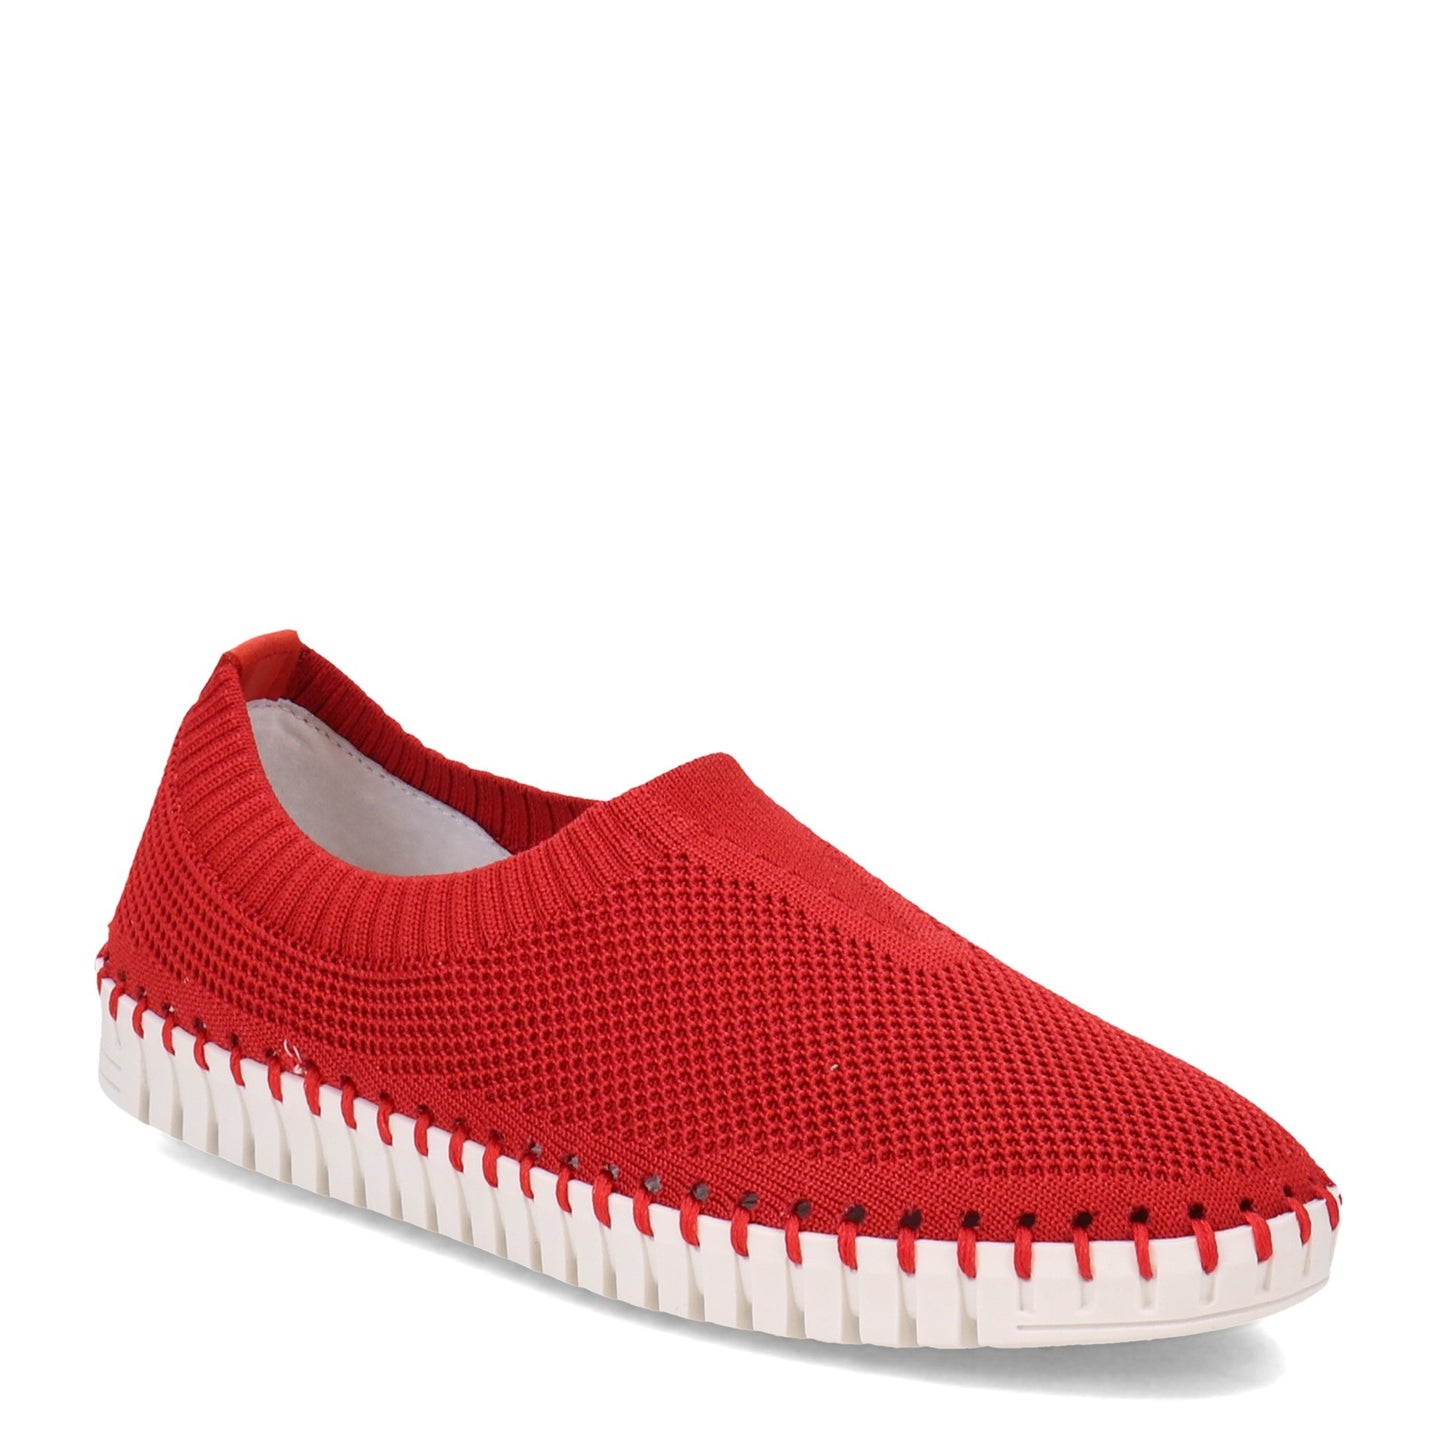 Peltz Shoes  Women's Eric Michael Lucy Slip-On RED BEAN LUCY-RED